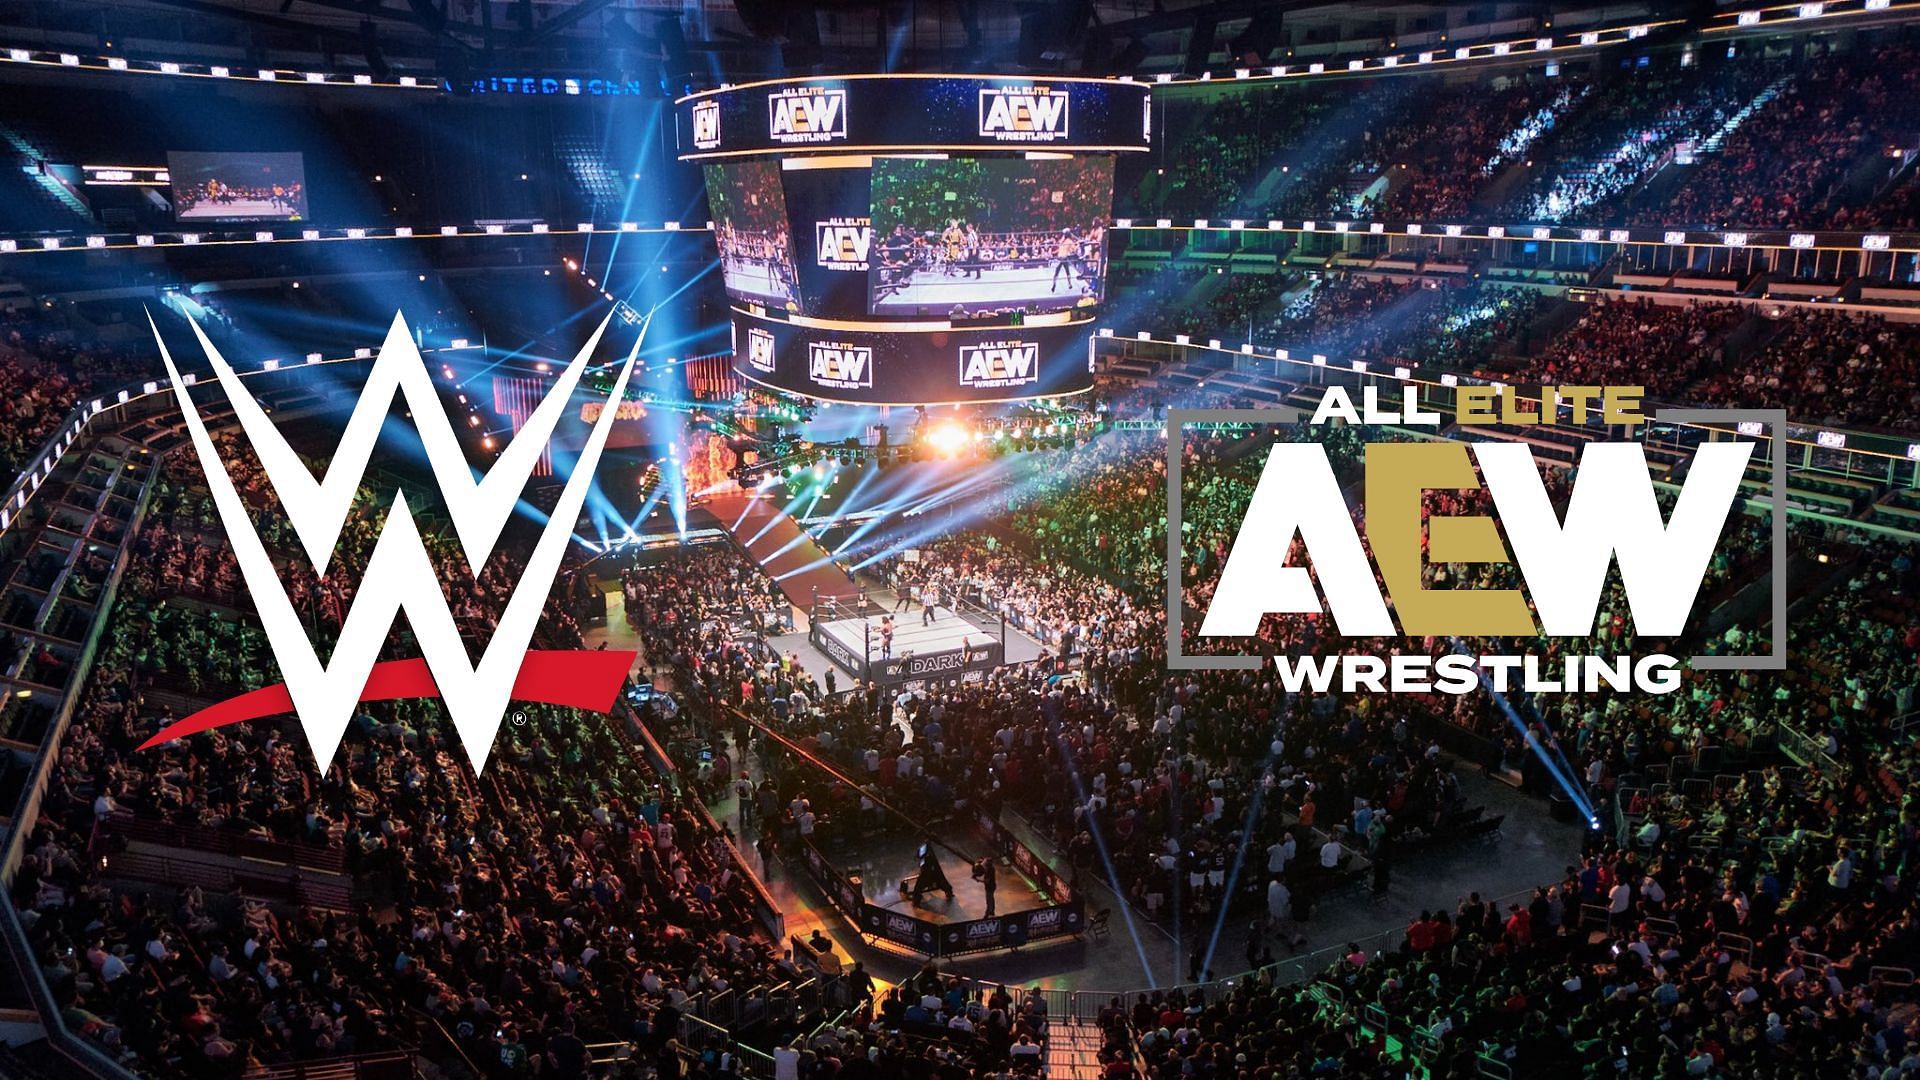 Which major star is open to joining AEW or WWE?